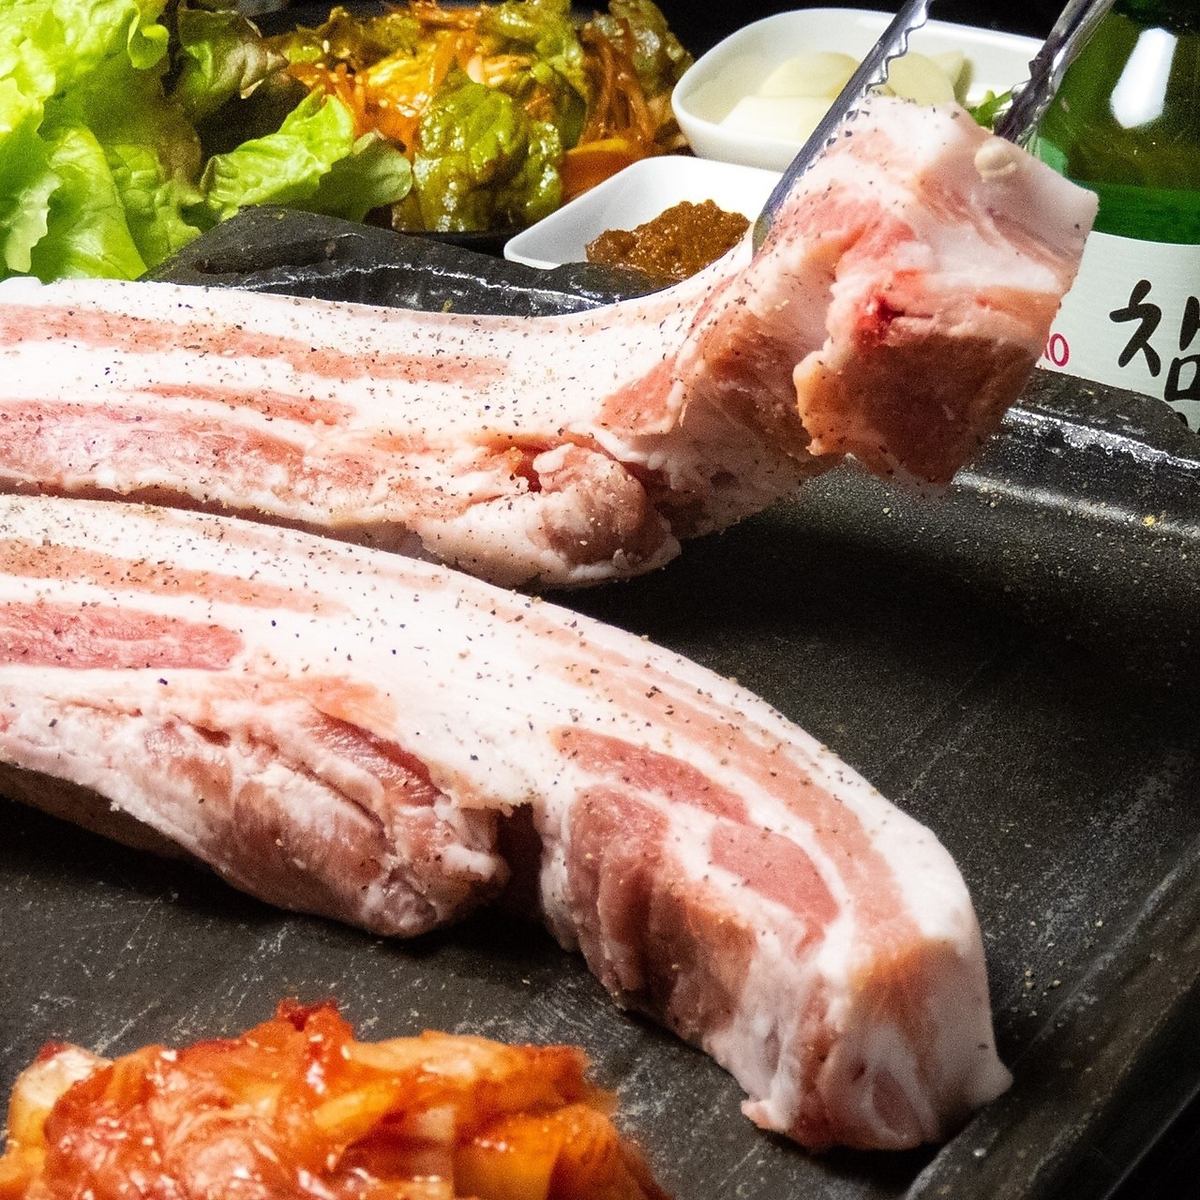 The menu is full of thick-sliced samgyeopsal, shrimp cheese fondue, cheese balls, and more!